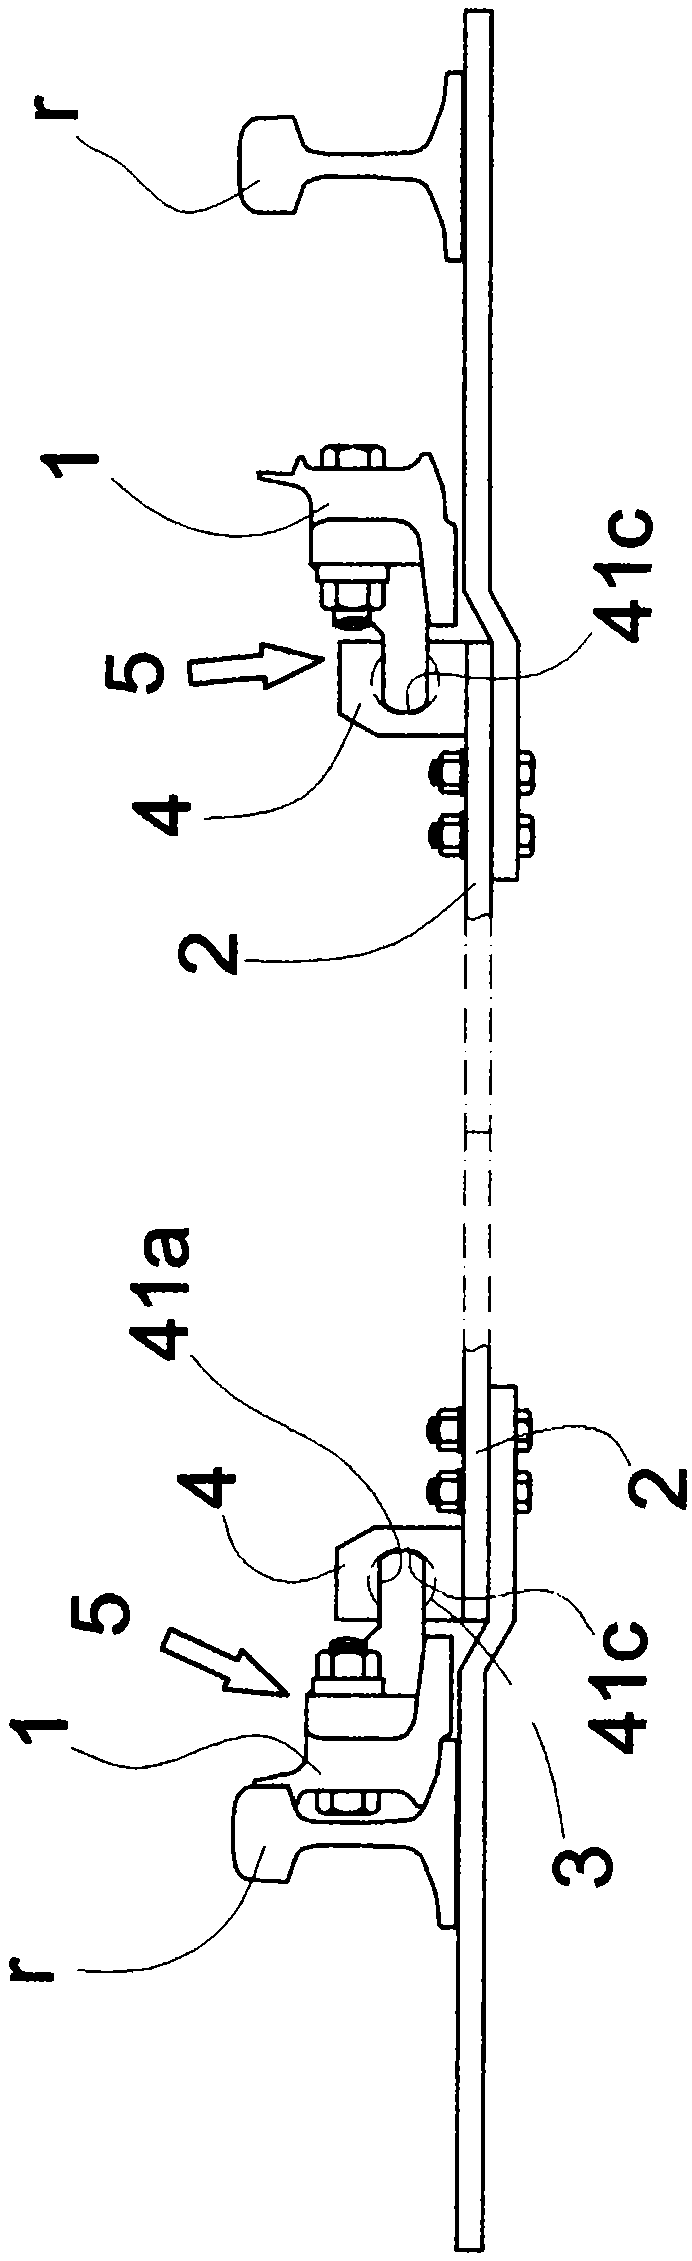 Connecting devices for switch rails and turning handles of railway switches